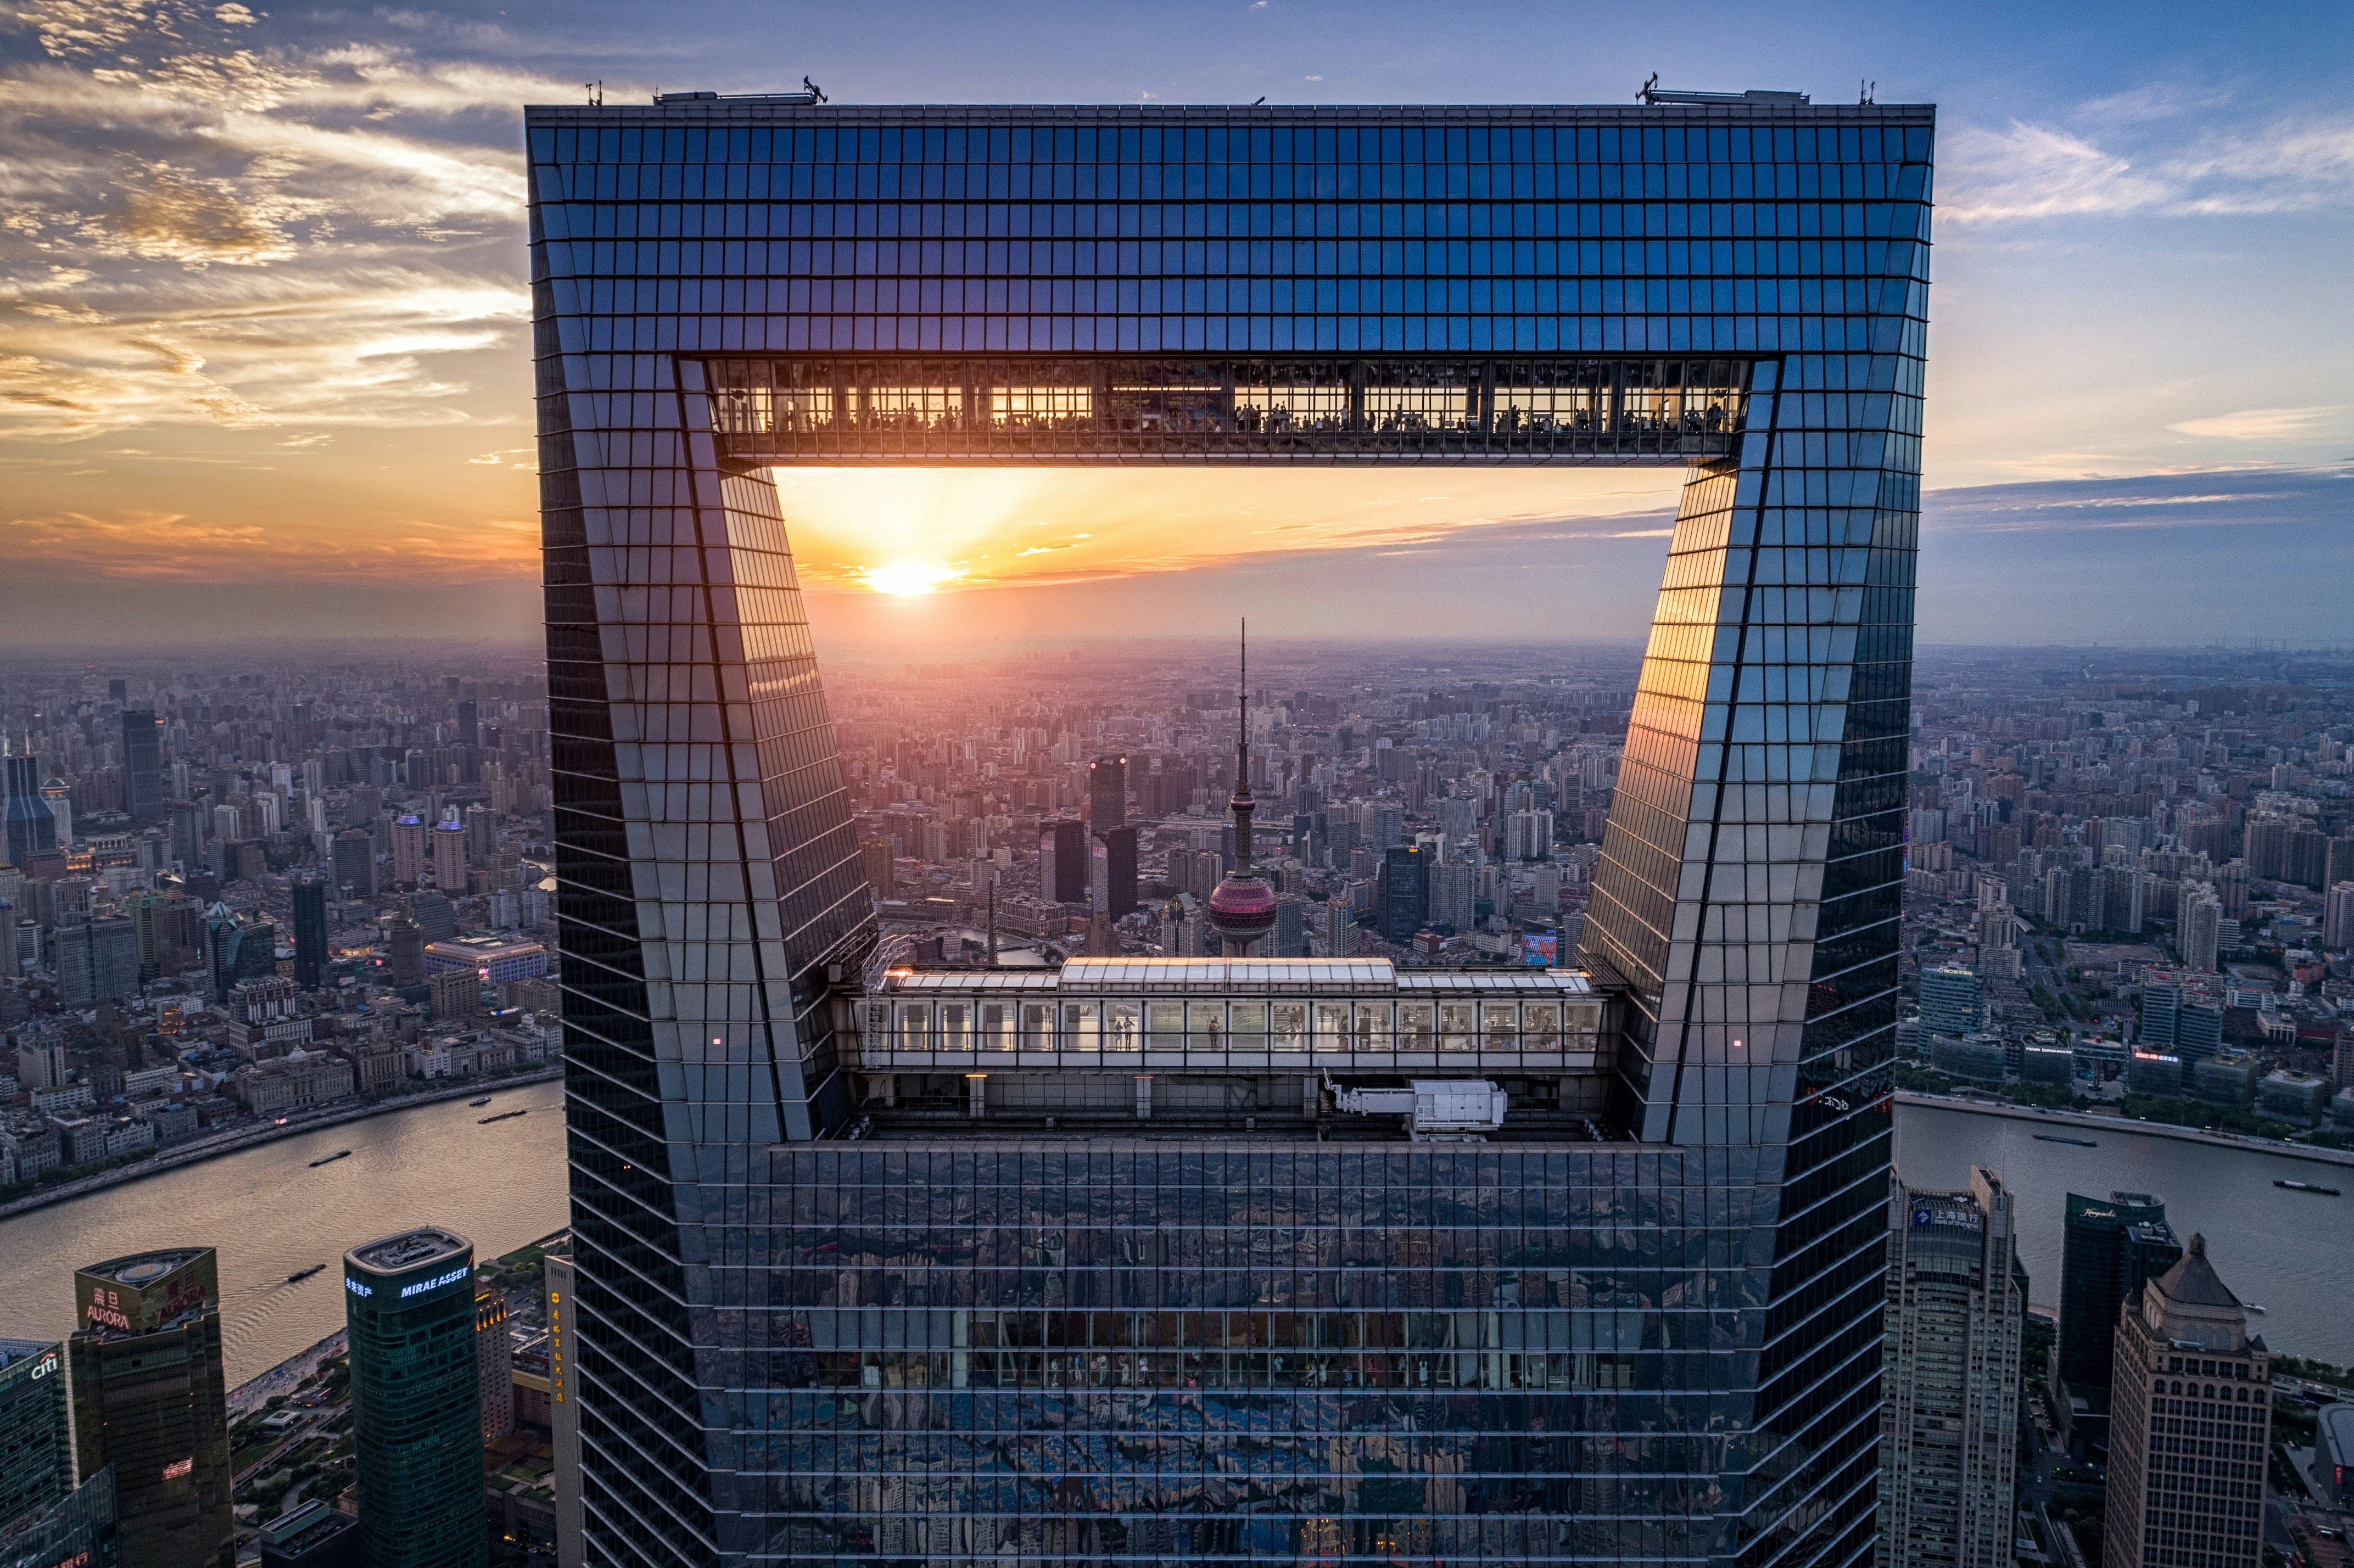 A view of the Shanghai World Financial Centre, a skyscraper with a square 'window' through the centre of it, which gives it the nickname of the bottle opener. Beyond the skyscraper the river and buildings of Shanghai are visible.